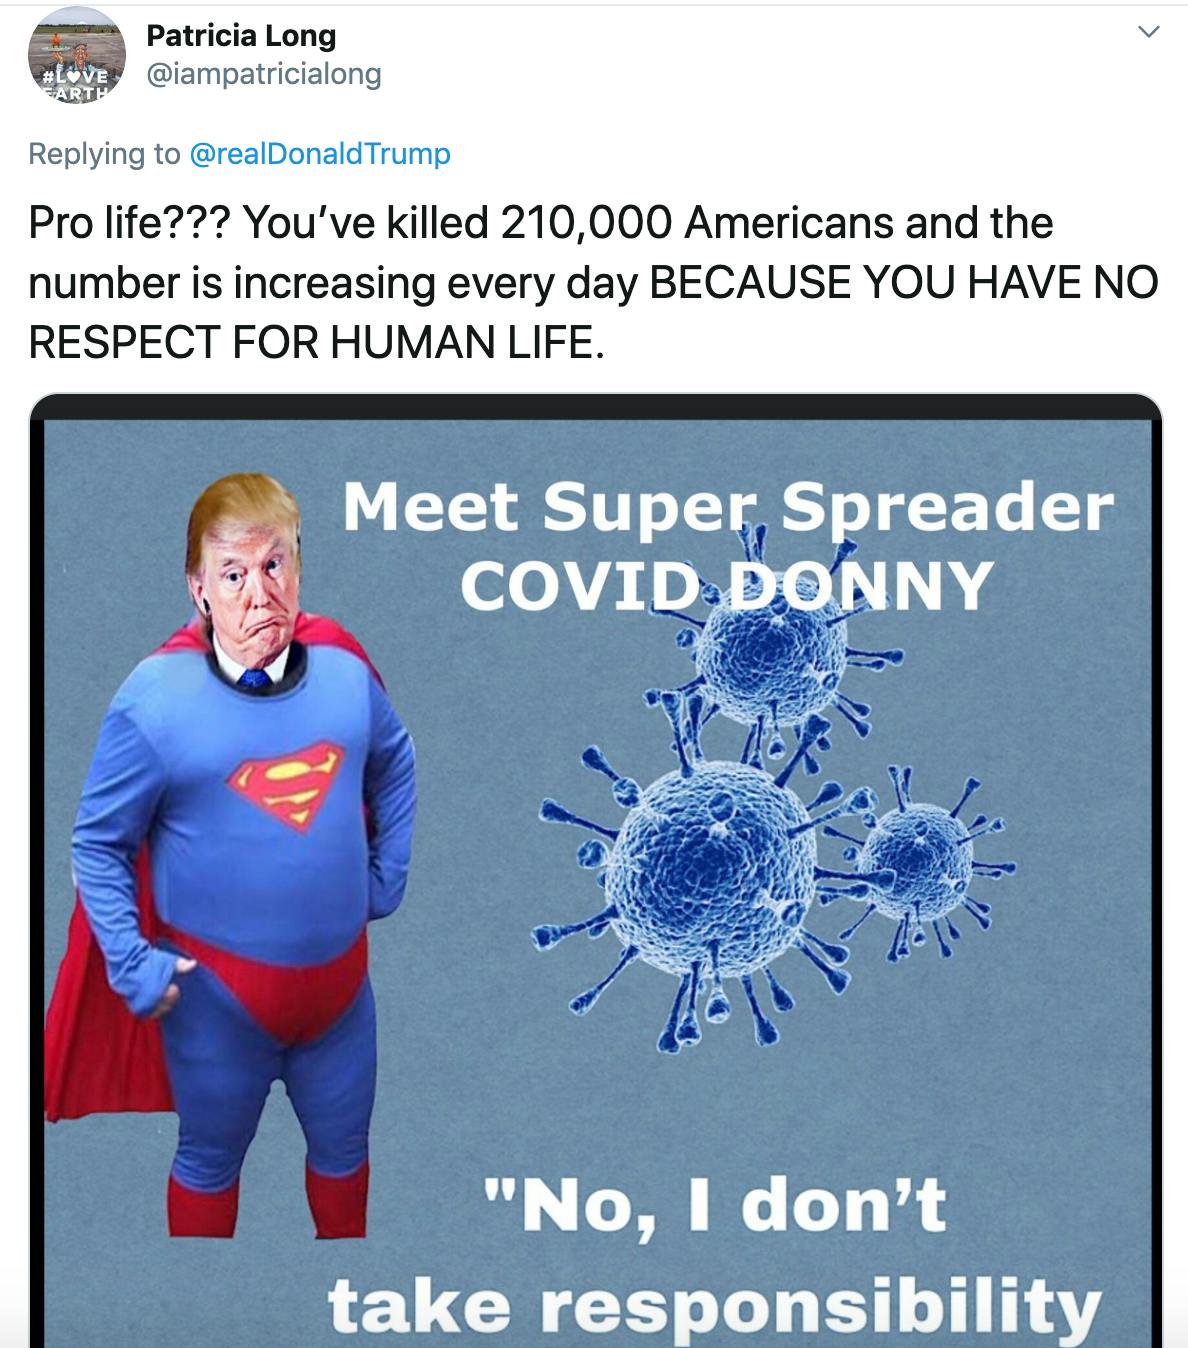 "Pro life??? You’ve killed 210,000 Americans and the number is increasing every day BECAUSE YOU HAVE NO RESPECT FOR HUMAN LIFE." image of Trump in a superman costume next to pictures of the coronavirus with the caption "meet super spreader Donny." and "No, I don't take responsibility."